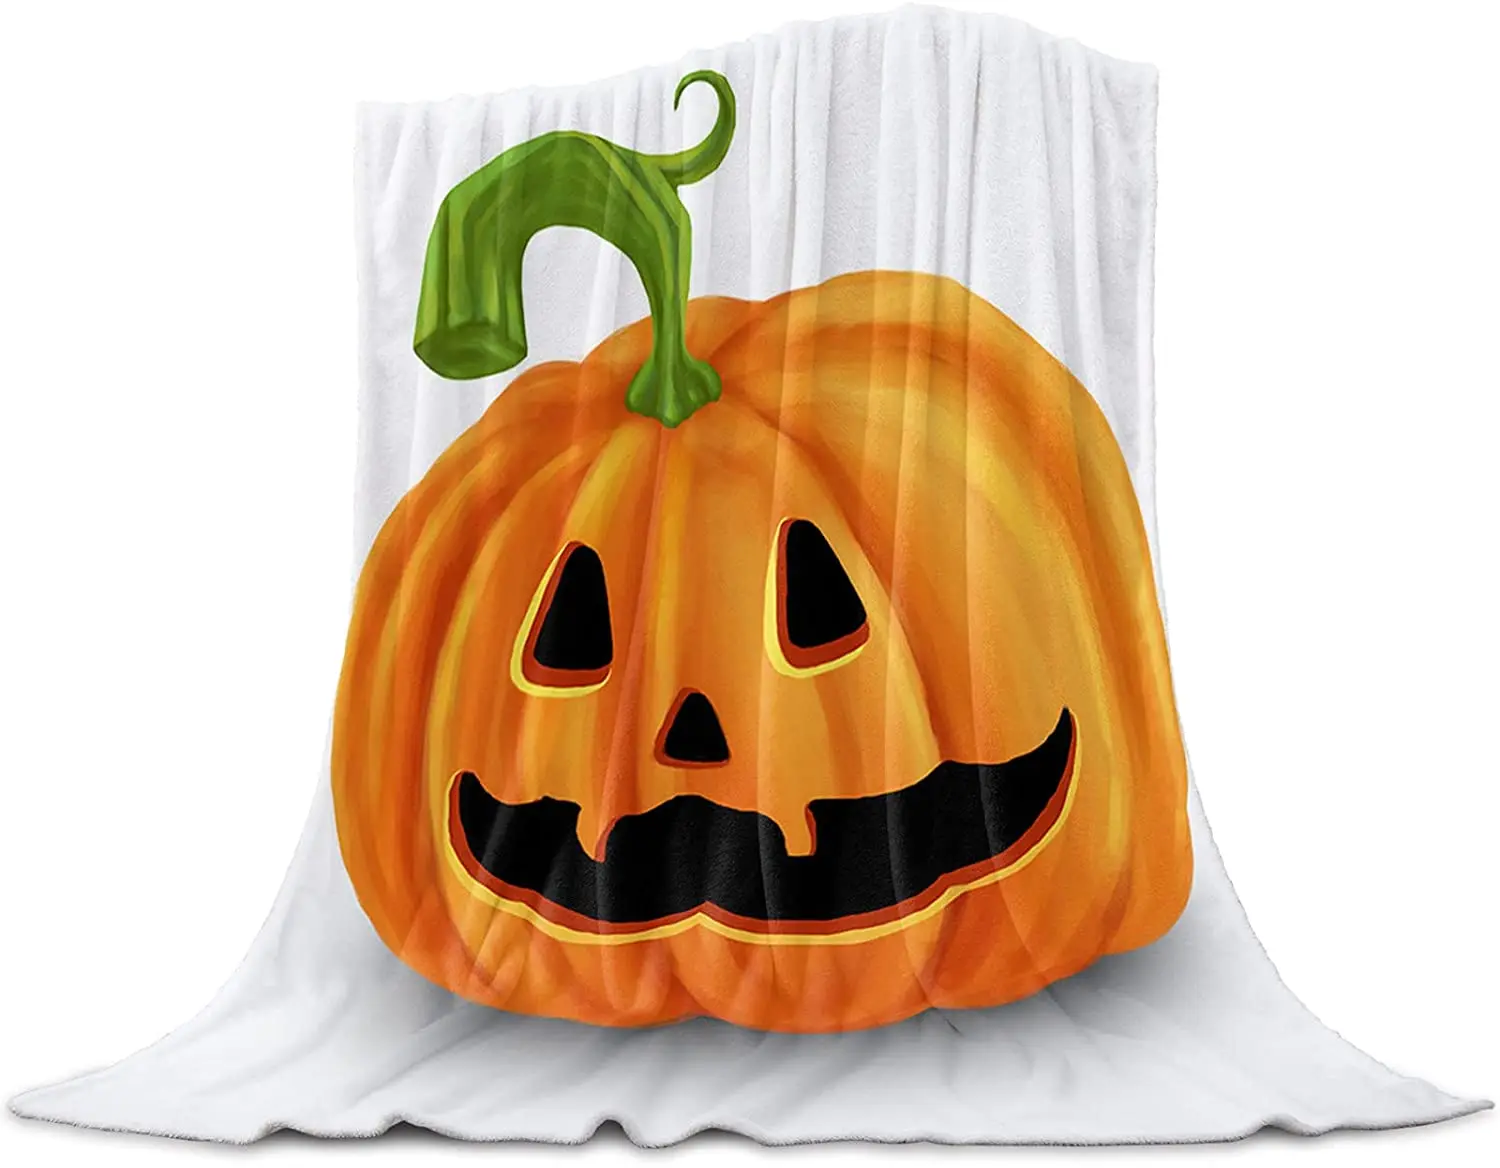 

Flannel Blankets and Throws for Couch Bed, Super Soft Cozy Lightweight Plush Throw Blanket,Halloween Theme Pumpkin Pattern